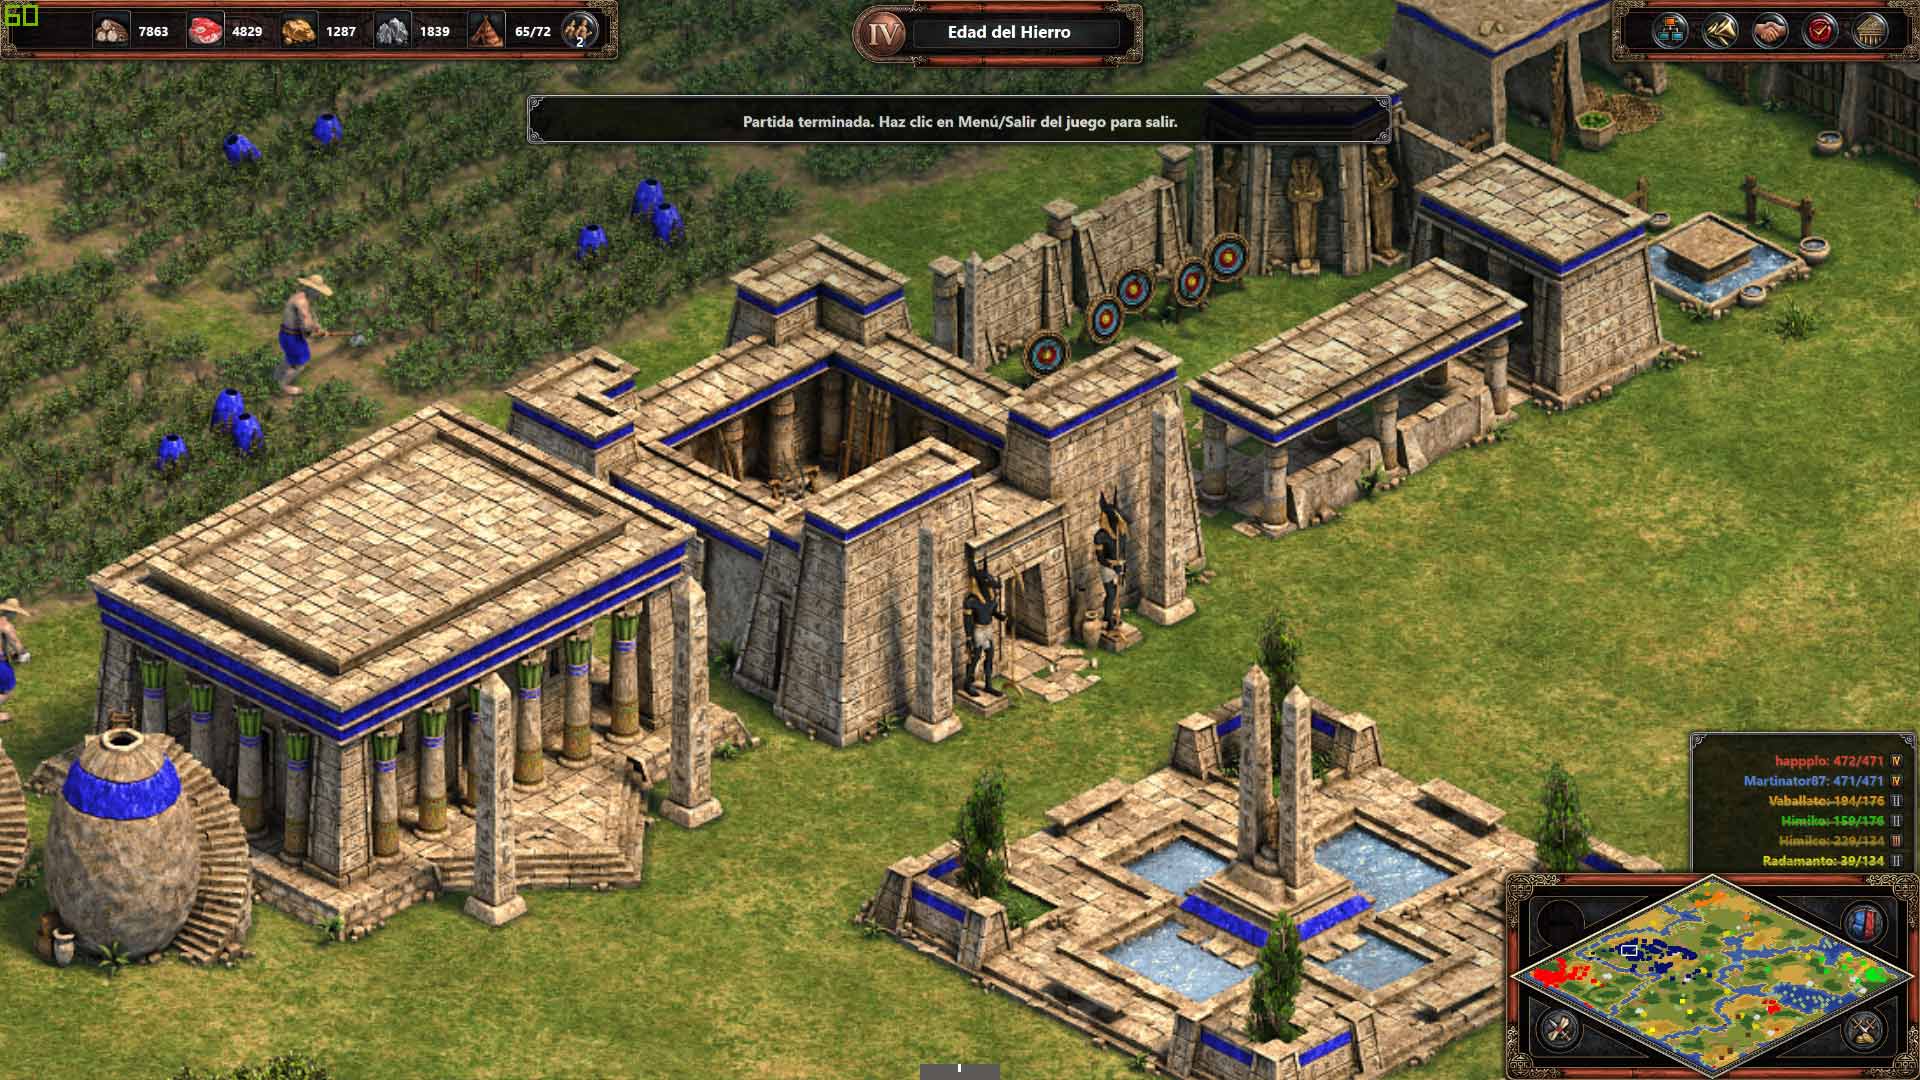 age of empires 2 definitive edition beta missing executable